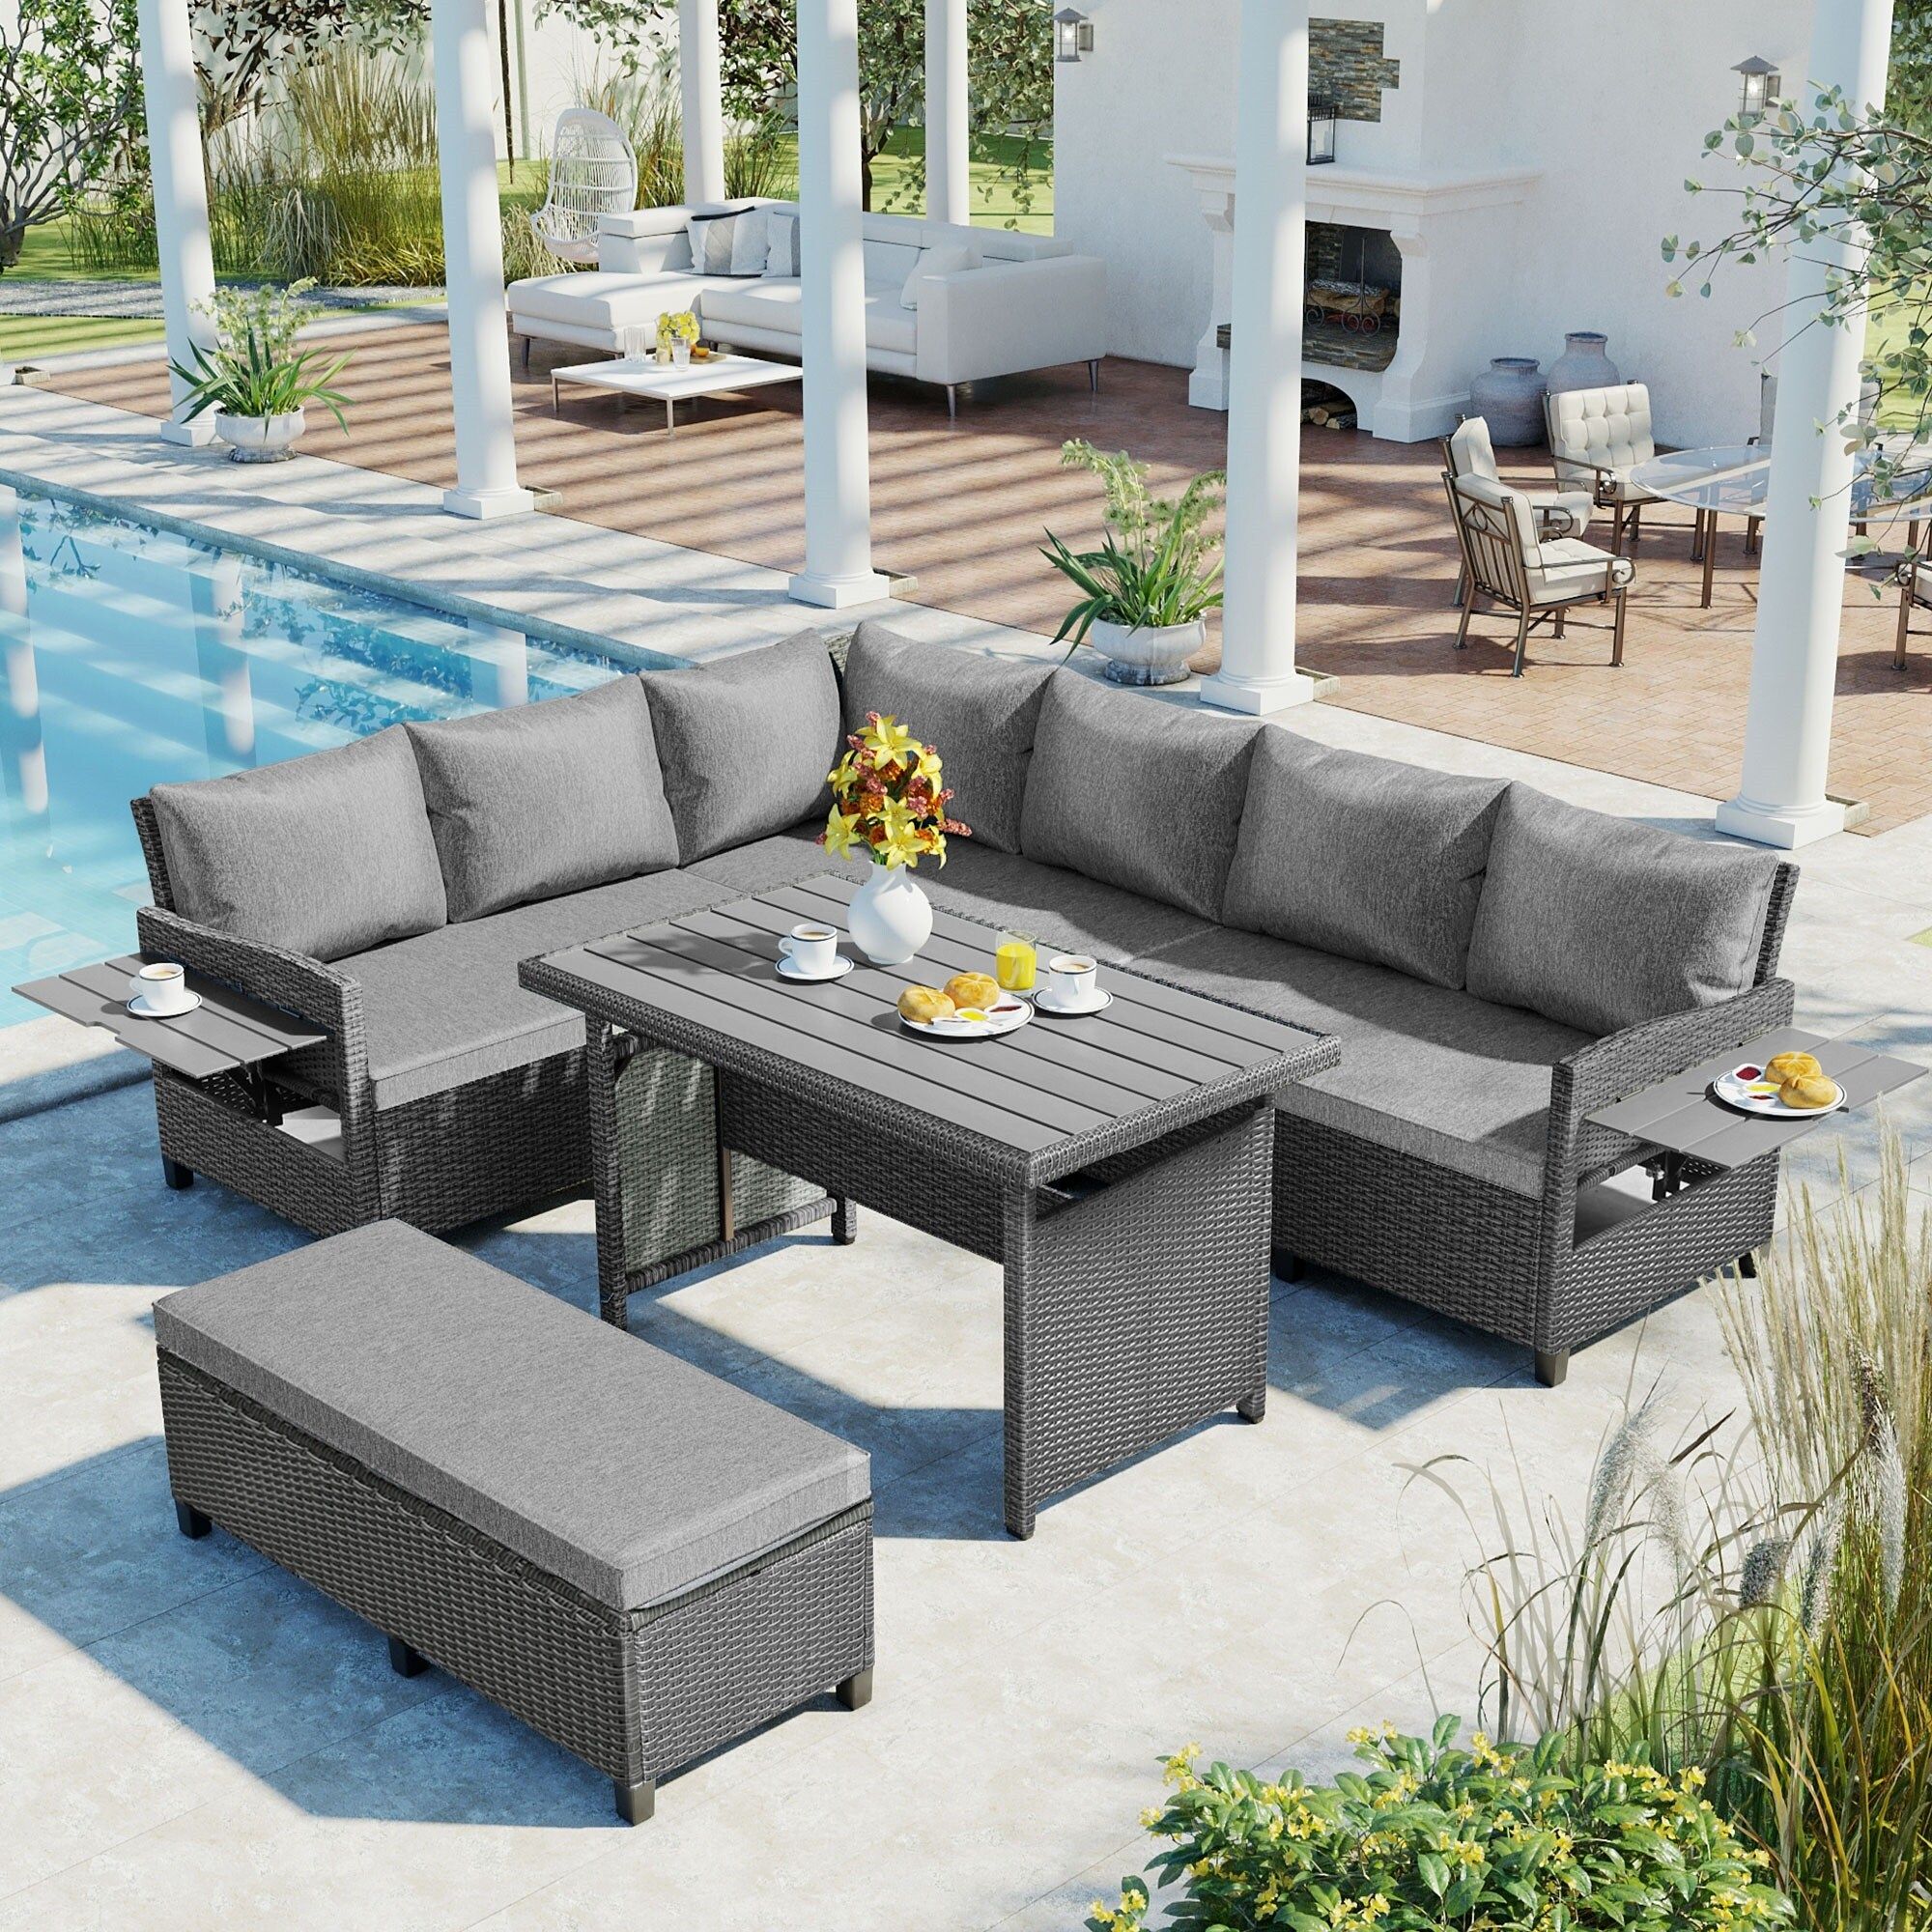 Oaks Aura 5 Piece Outdoor Patio Rattan Sofa Set, Sectional Wicker L Shaped  Furniture Set With Washable Covers For Backyard – On Sale – Overstock –  37534996 With Oaks Table Set With Patio Cover (View 15 of 15)